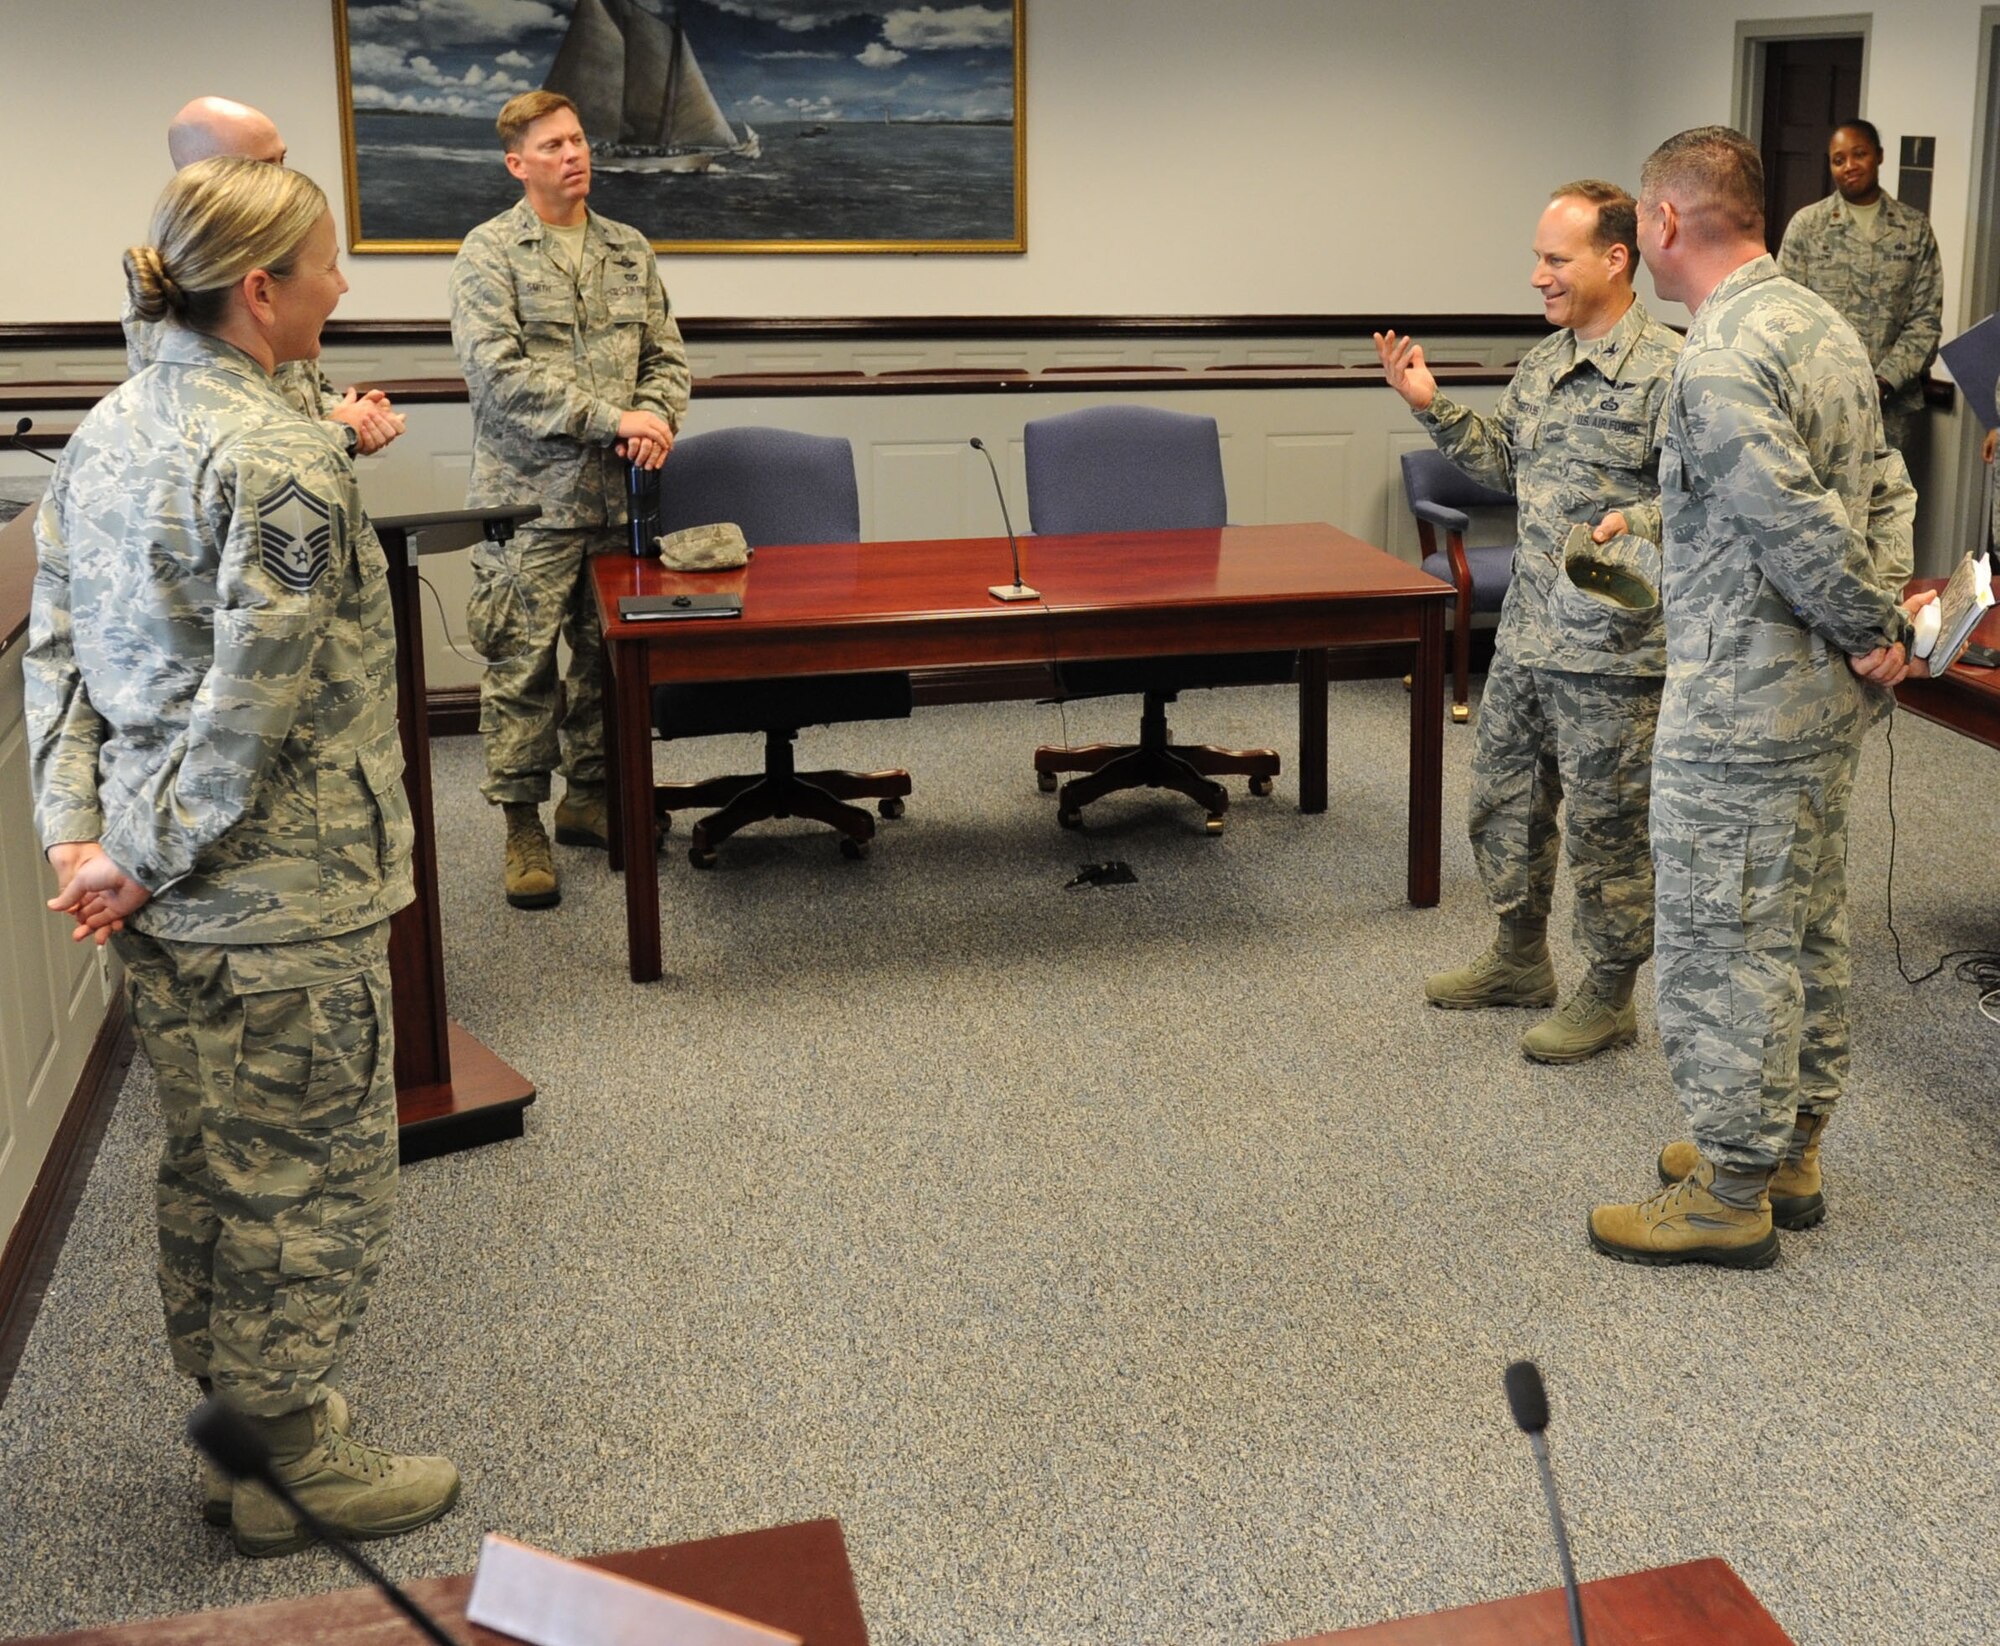 Col. Todd Weyerstrass, 2nd Air Force vice commander, receives a tour of the legal office at the Sablich Center during an 81st Training Wing orientation tour July 12, 2016, on Keesler Air Force Base, Miss. The purpose of the tour was to become familiar with the wing’s mission, operations and personnel. (U.S. Air Force photo by Kemberly Groue/Released)